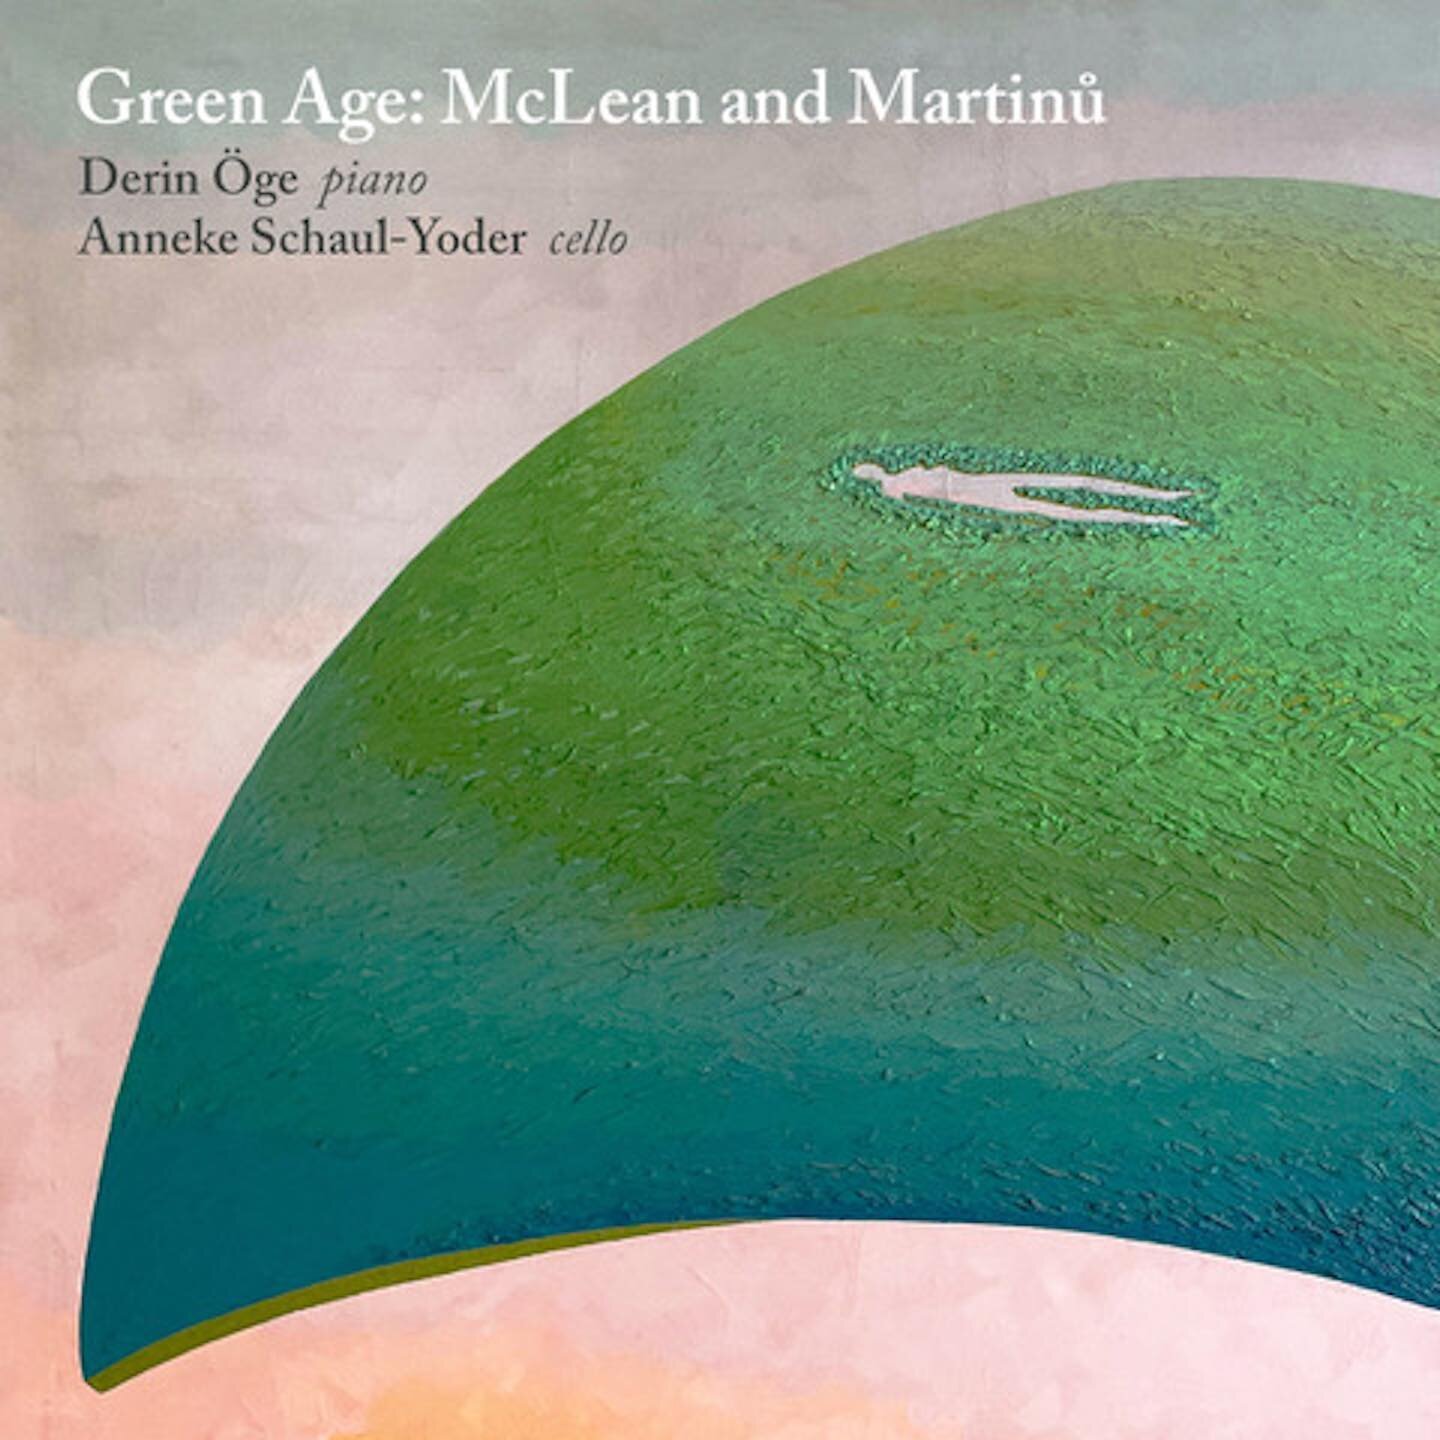 Record release! Drop party May 19 8pm @salononkingston BK. Come celebrate with us! Proud to be sharing this music with the world. Streaming link in bio&hellip;. #greenage #martinu #cello #piano #recordrelease @systemdialingrecords